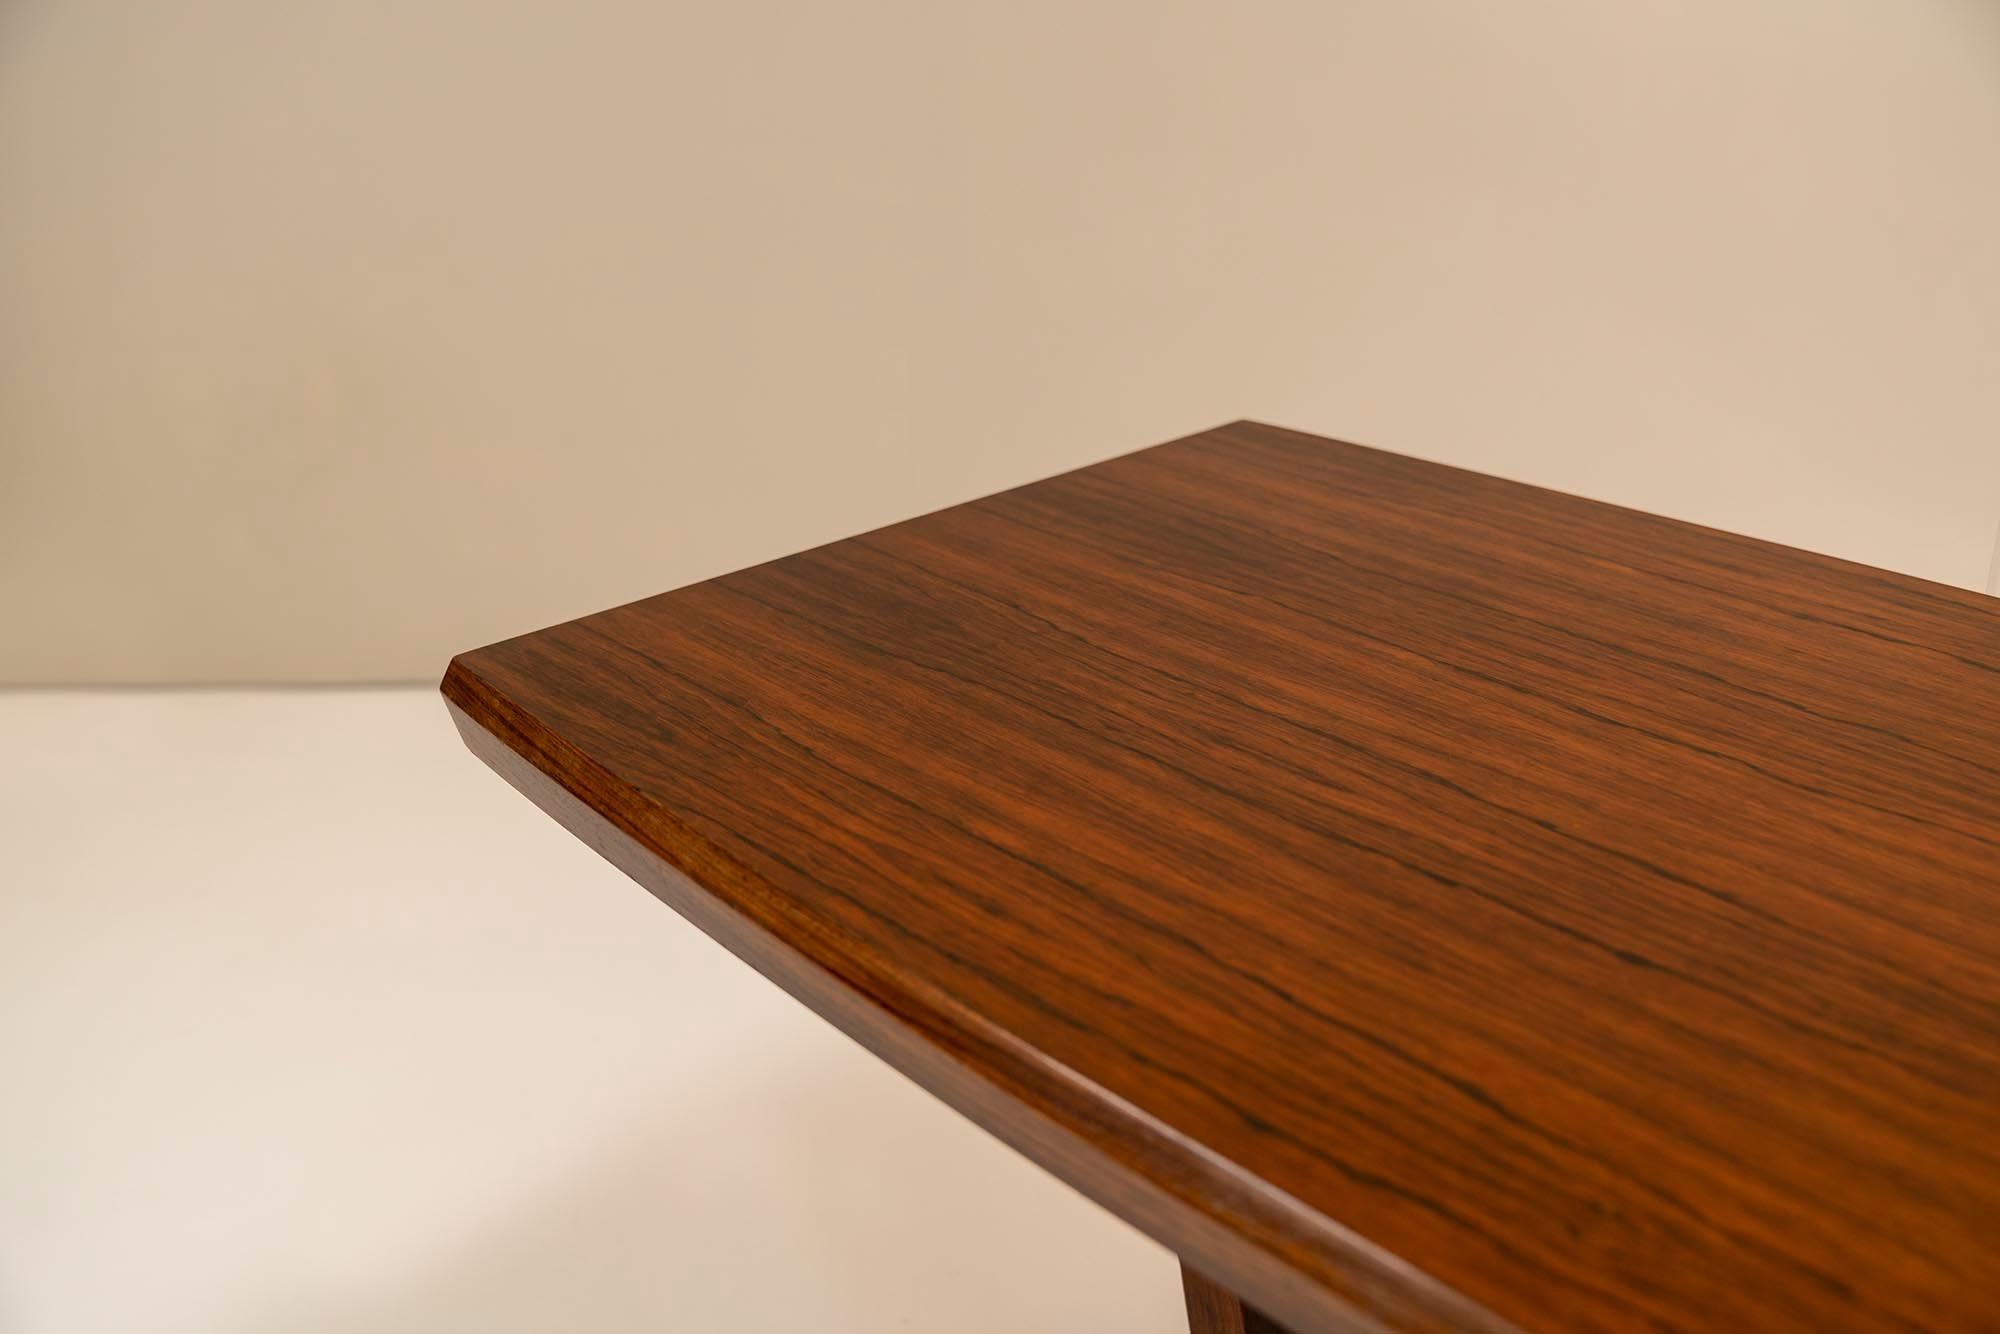 Architectural Large Coffee Table in Rosewood Veneer and Metal, 1960s For Sale 1